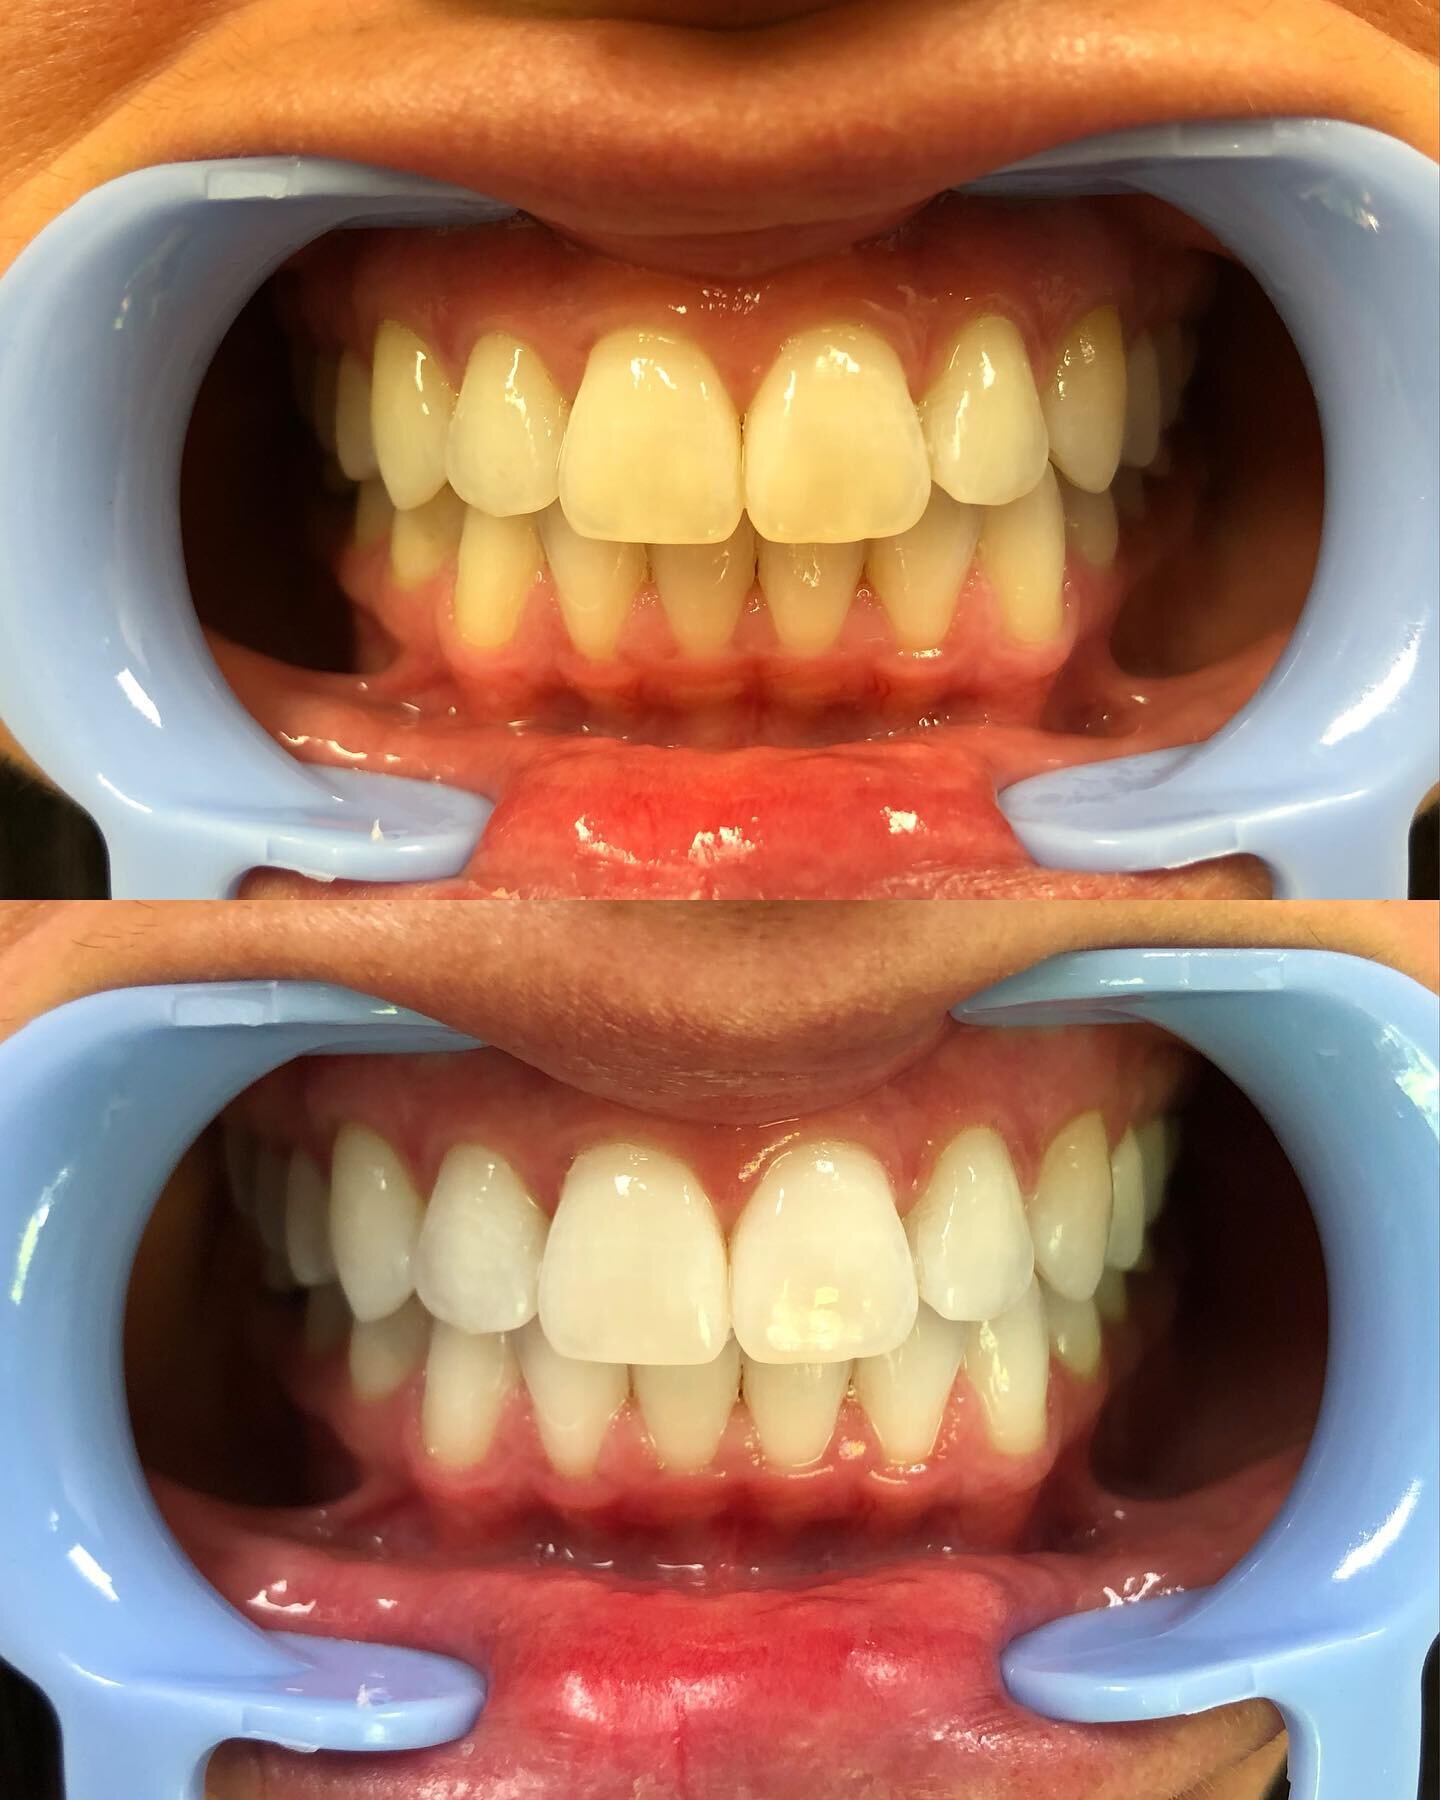 On Wednesdays we whiten 🦷⚡️
.
.
We now offer two ways to professionally bleach your teeth! We&rsquo;ve always offered custom bleach trays you can take home &amp; use on your time...but NOW...we offer in-office whitening too! Check out these results 